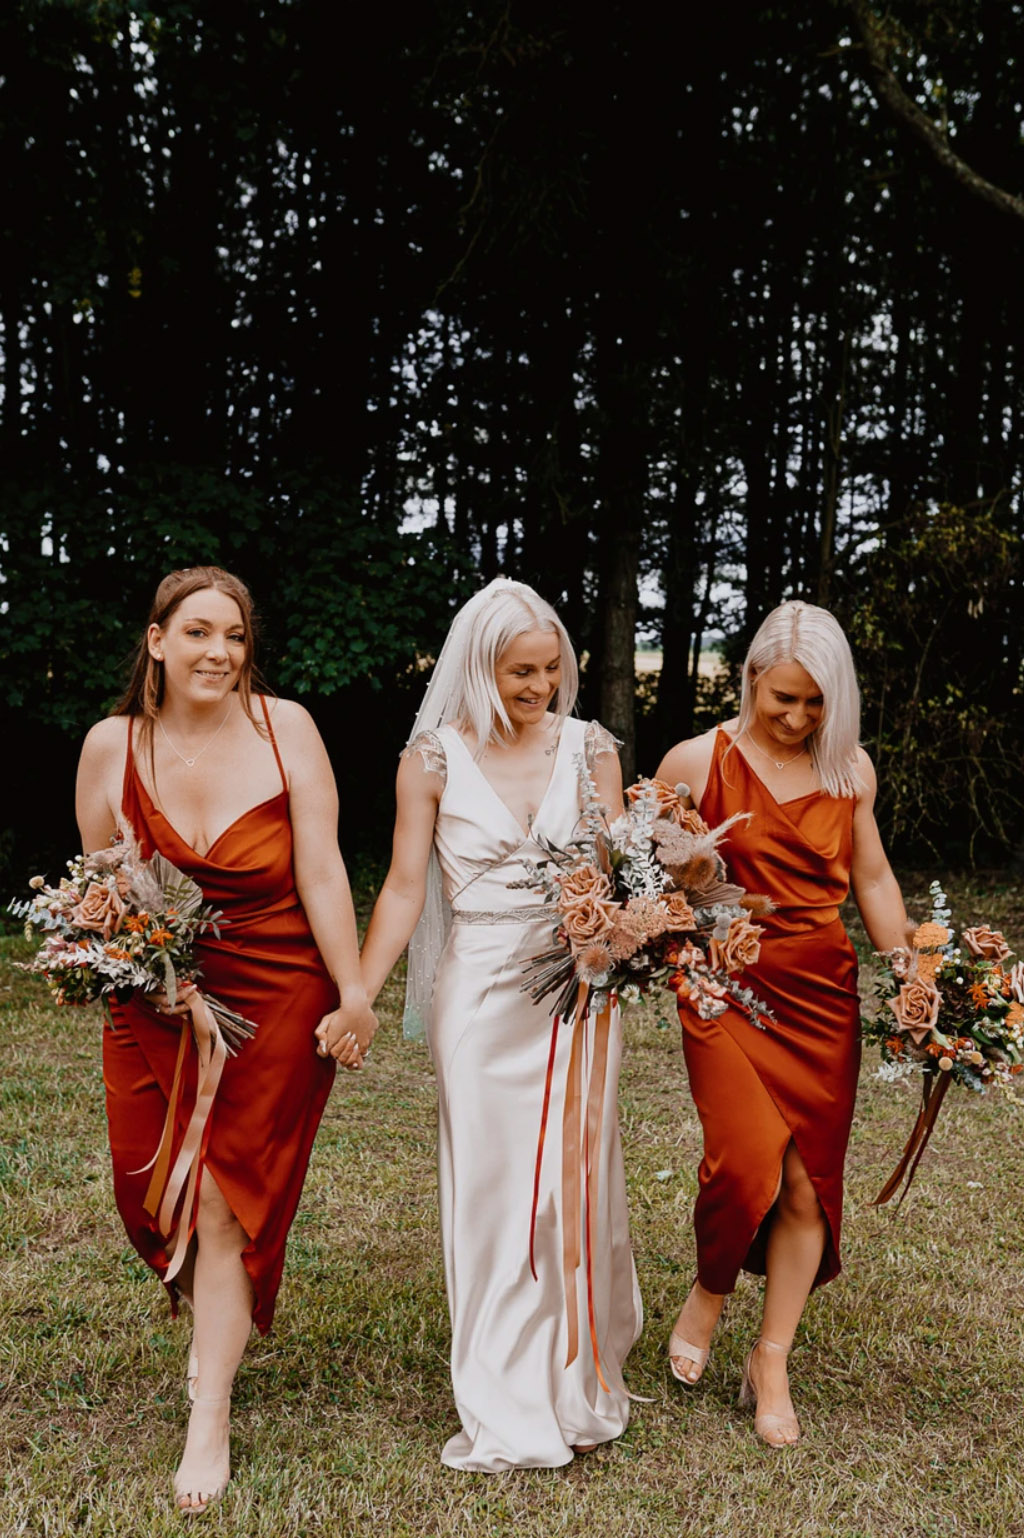 Bridesmaids in burnt orange dresses - Gabriela's Photography and Film, Sheffield South Yorkshire wedding photographer and videographer